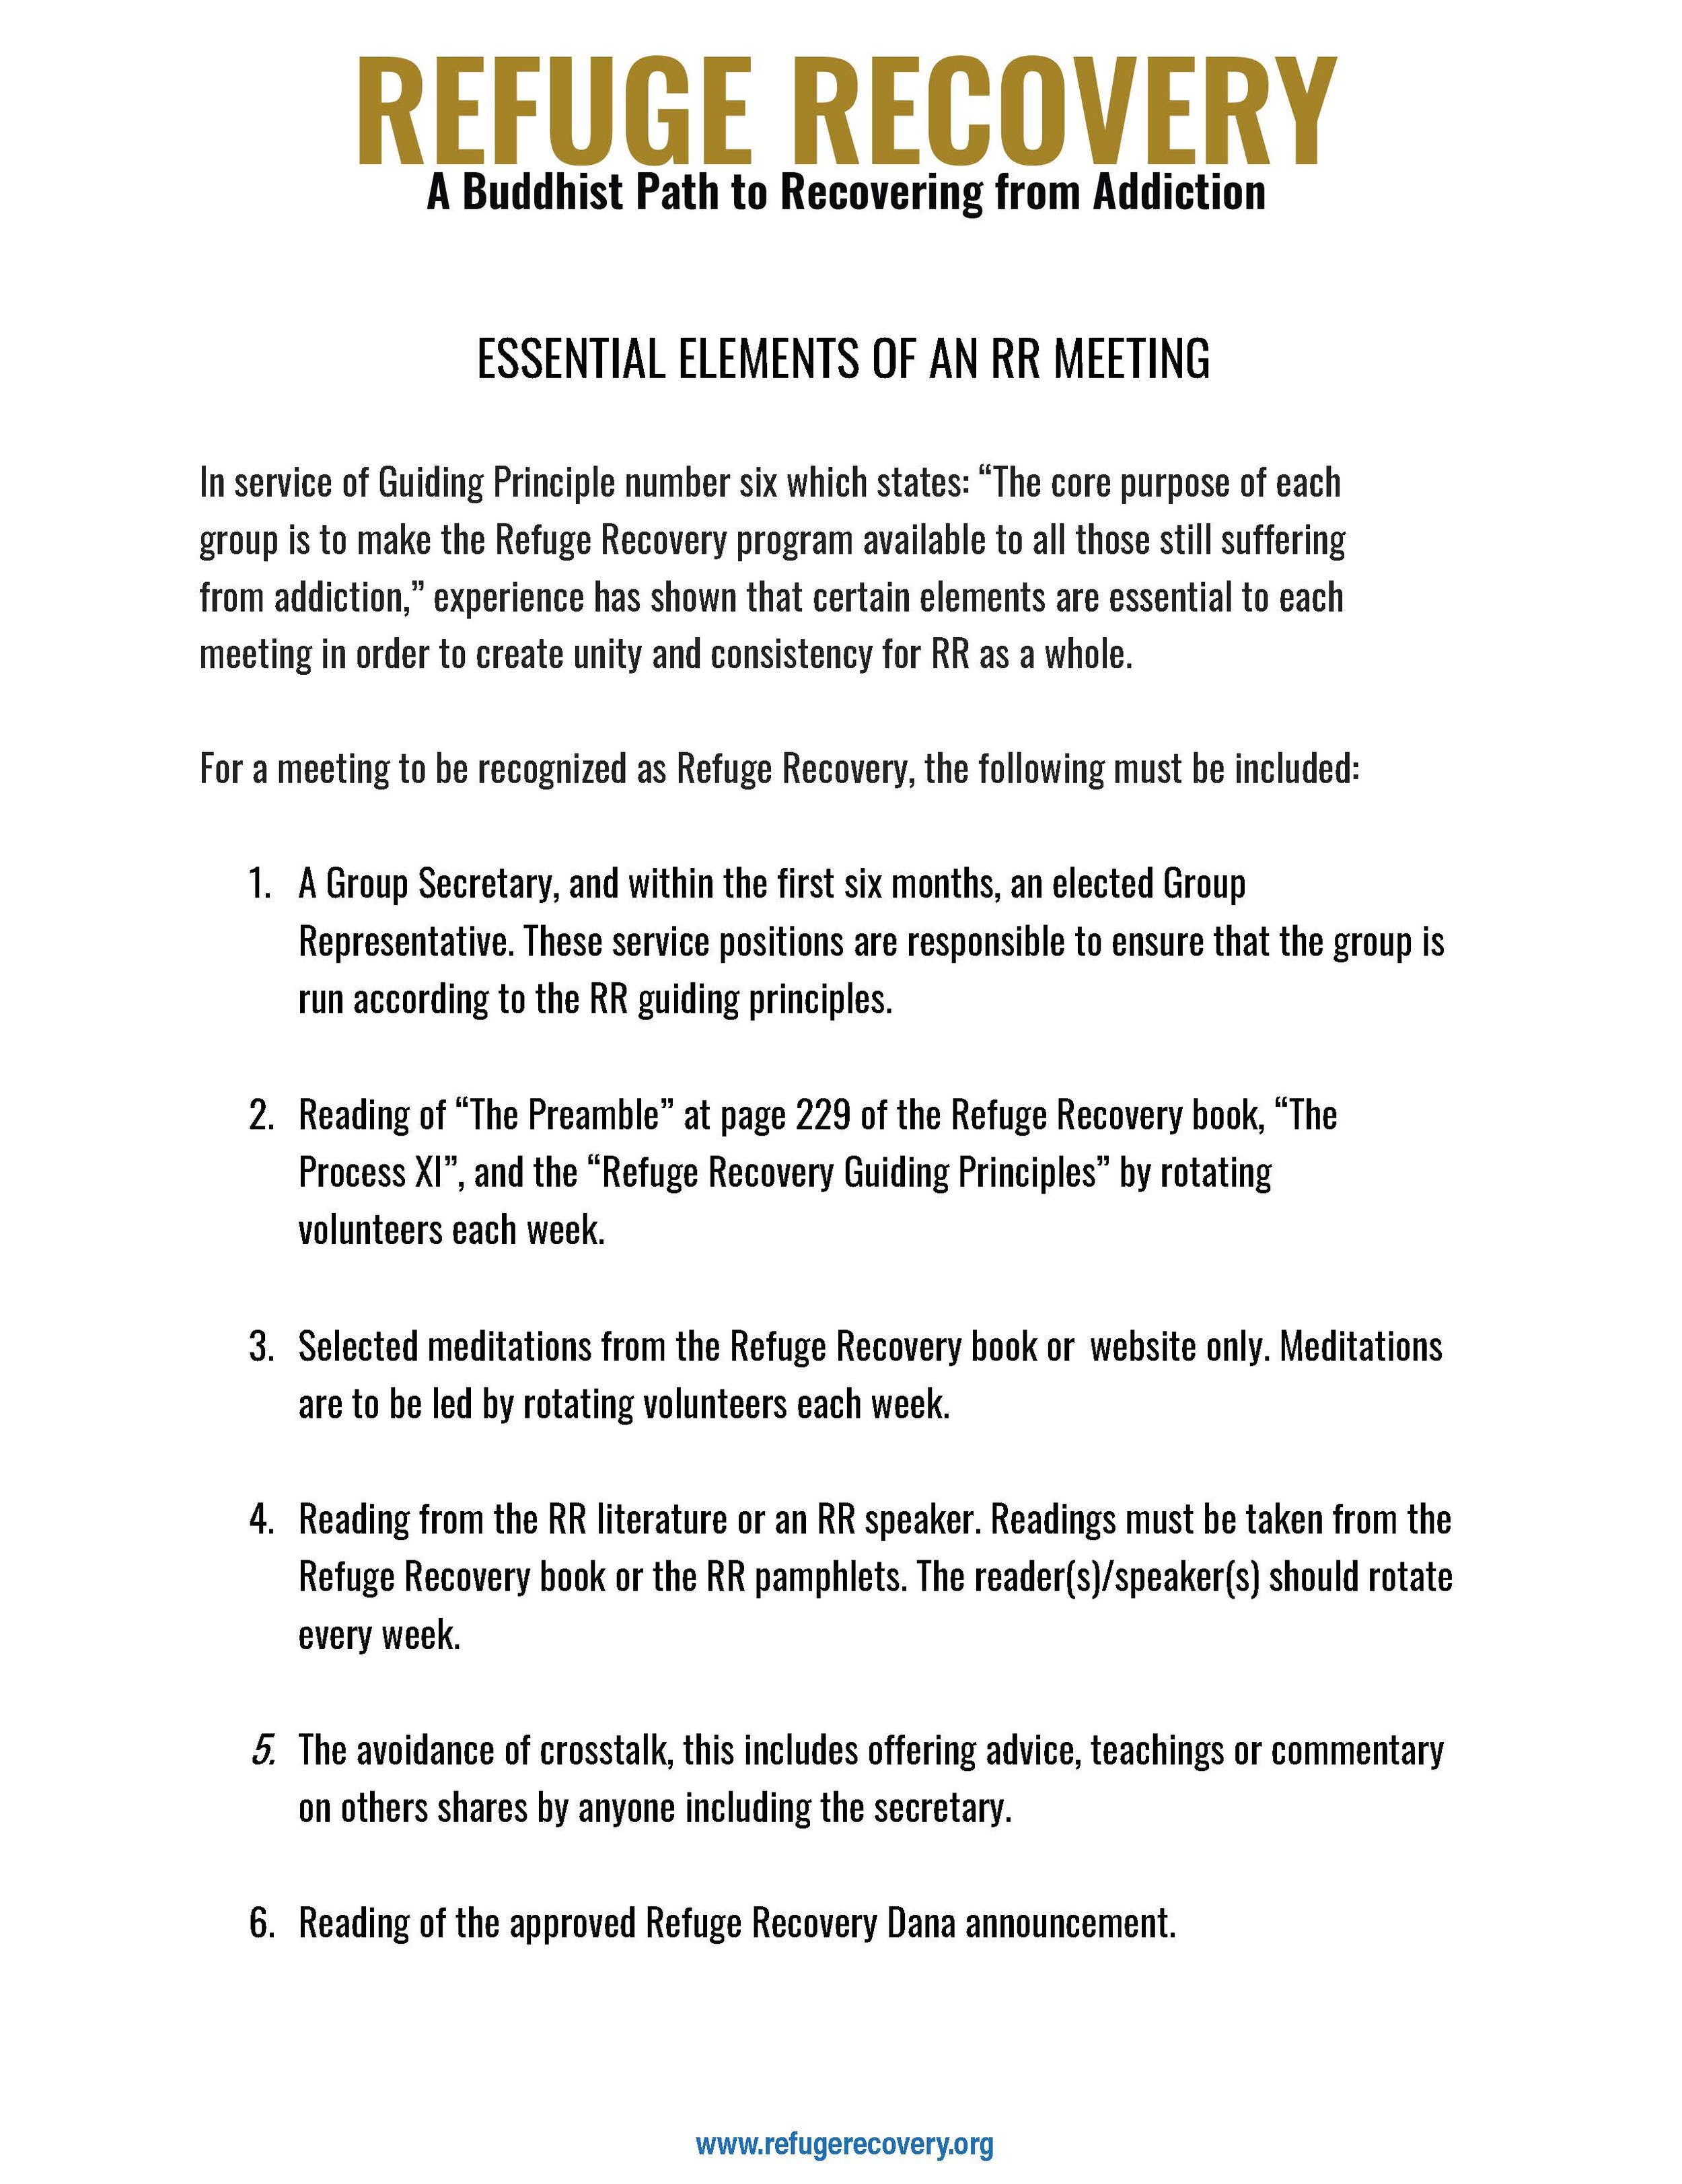 ESSENTIAL ELEMENTS OF AN RR MEETING_Page_1.jpg